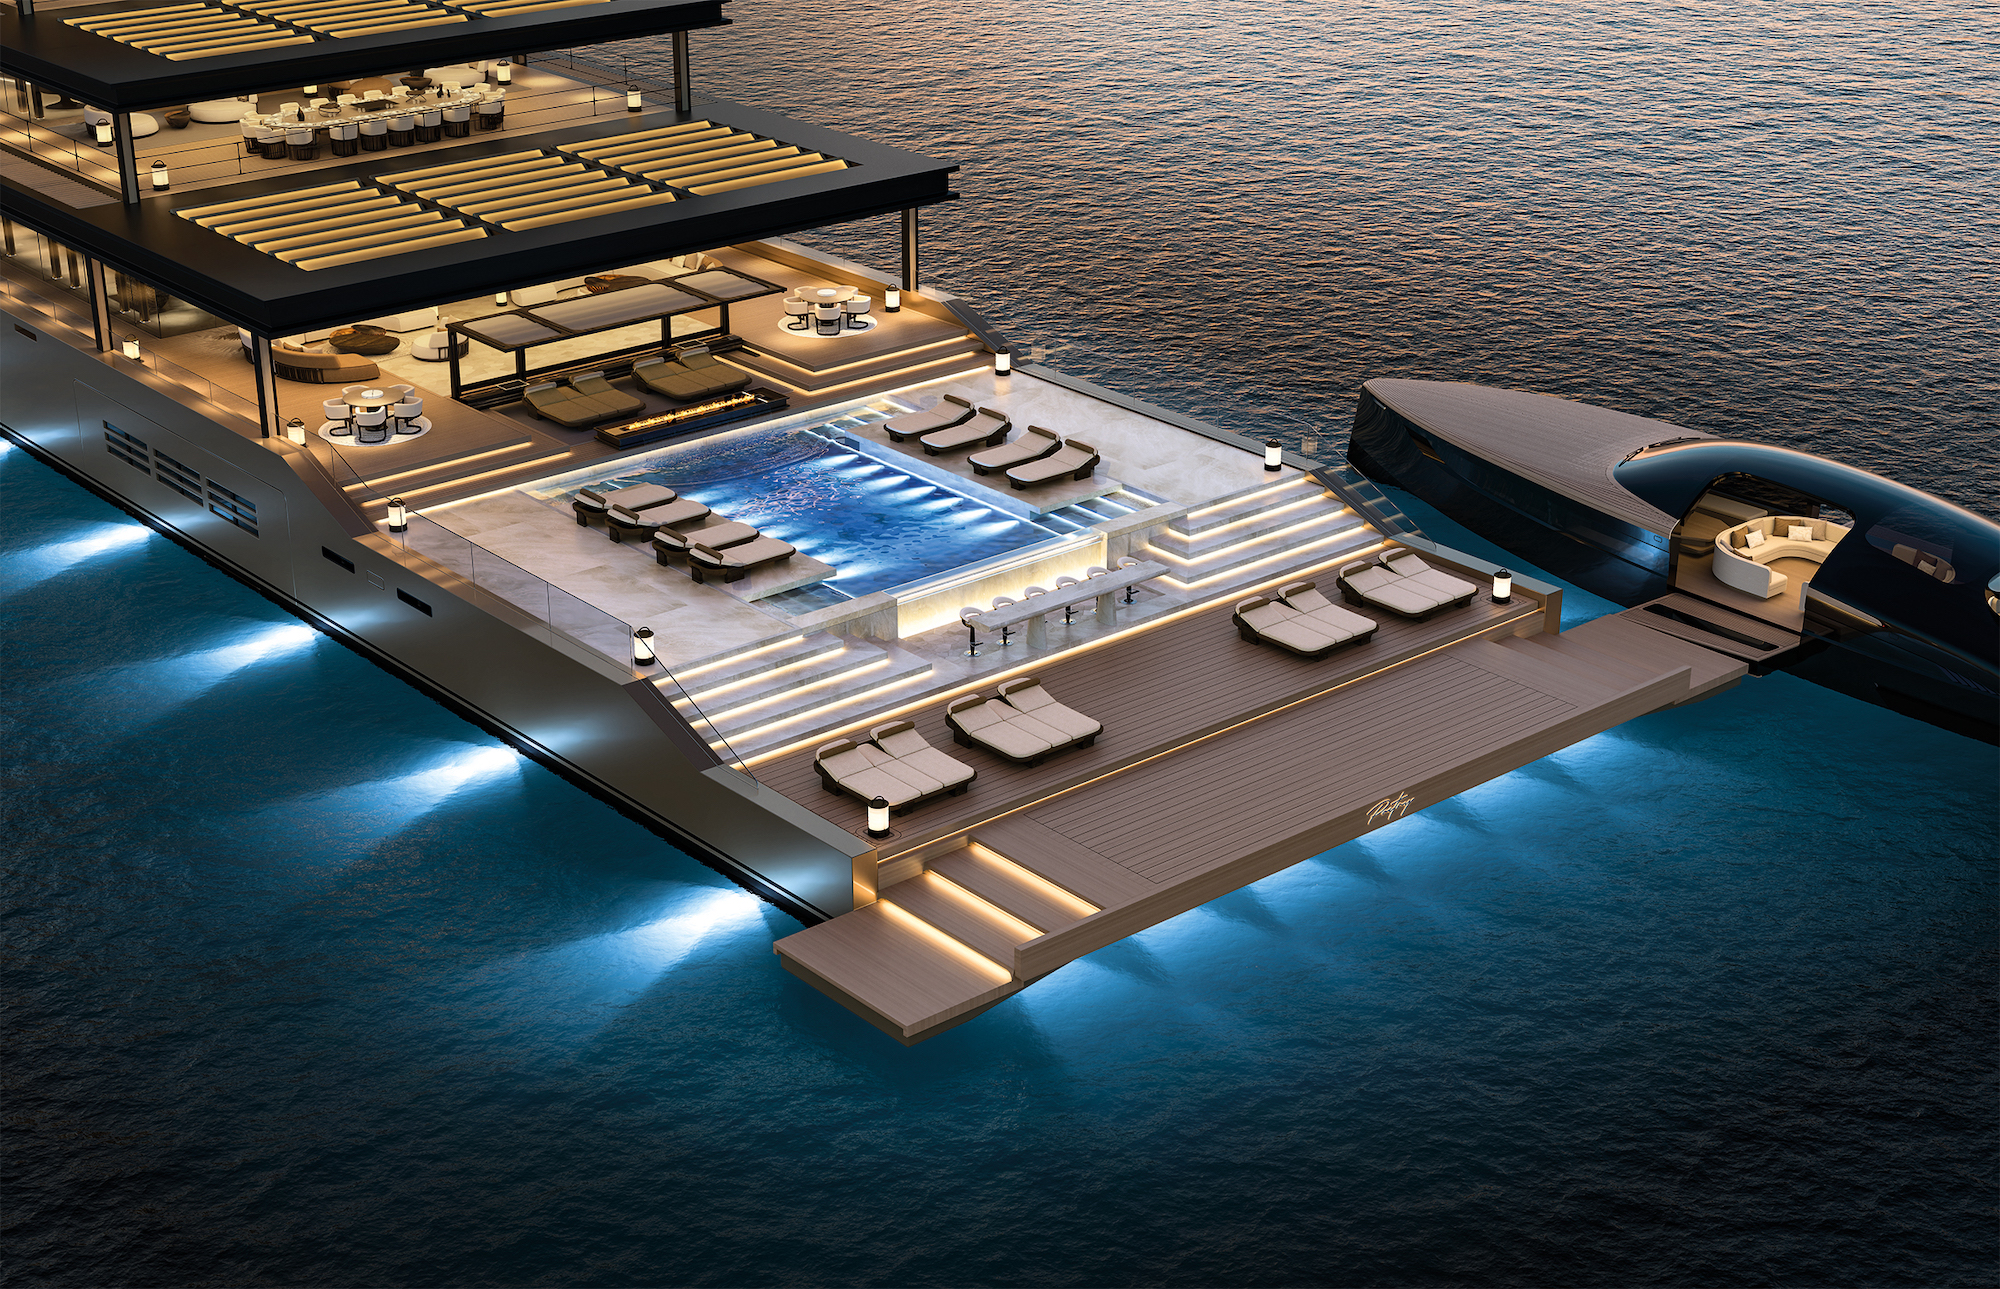 The superyacht concept Poetry by Dutch studio Sinot Yacht Architecture & Design is created to resemble a luxurious beach club - Effect Magazine